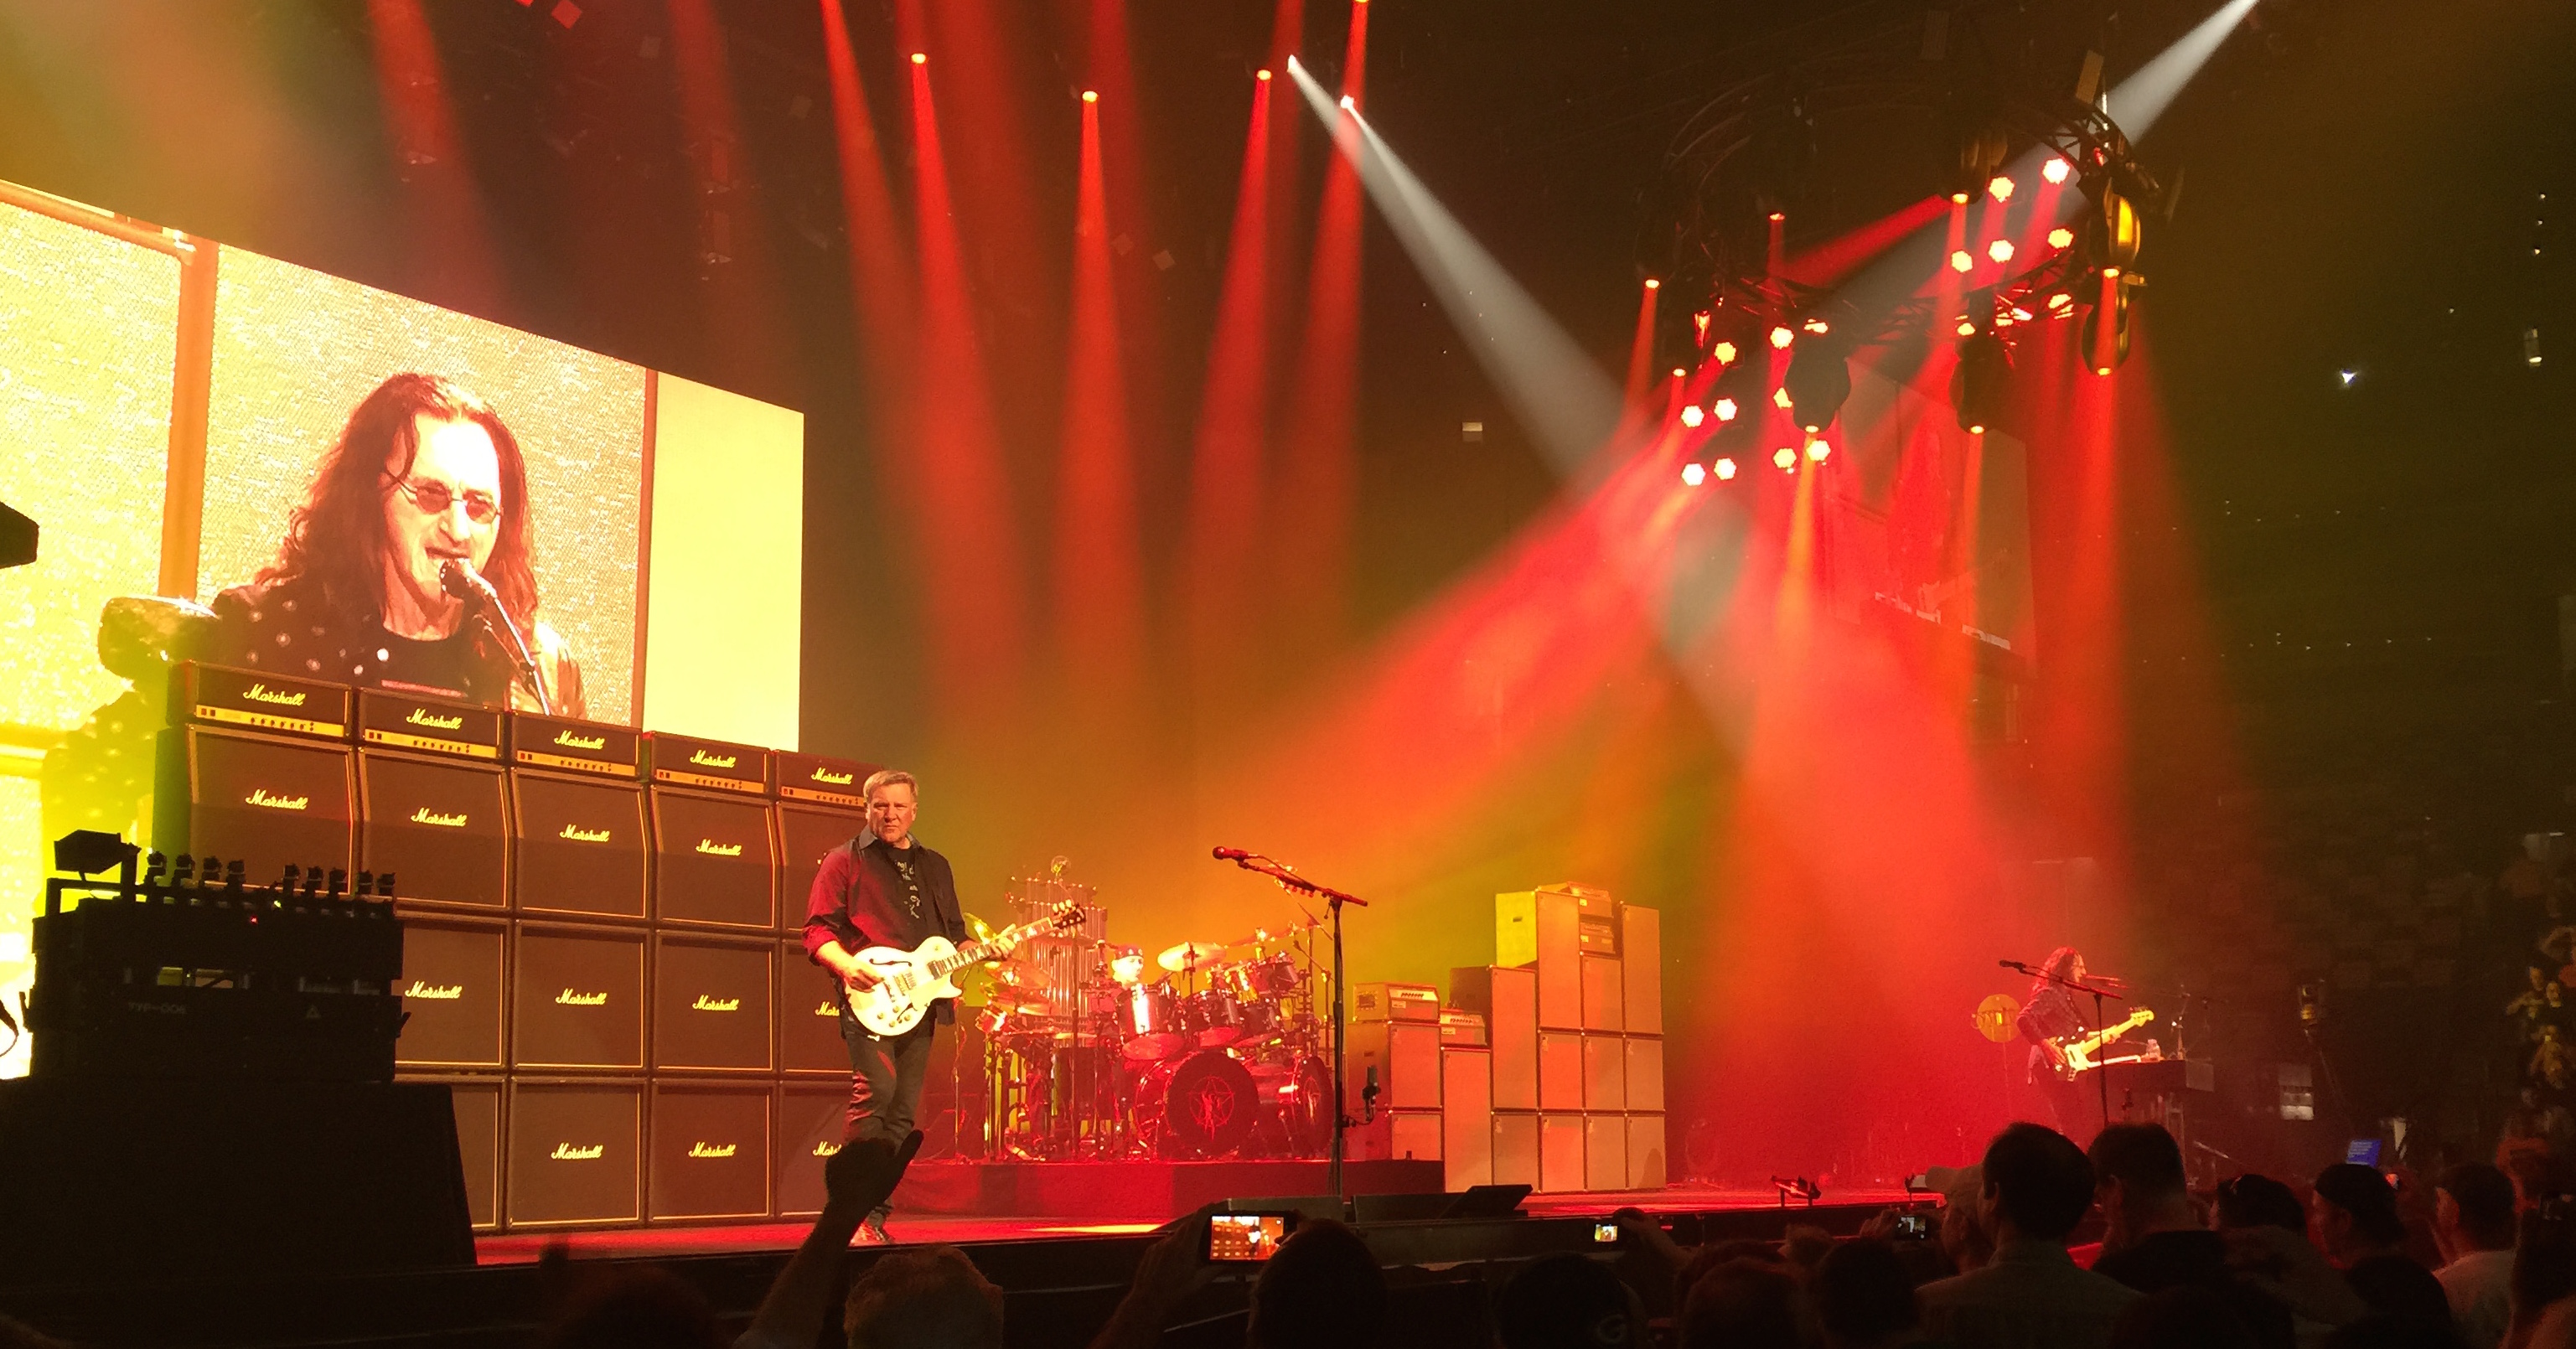 A humble review of Rush R40 in Boston on Tue Jun 23, 2015.